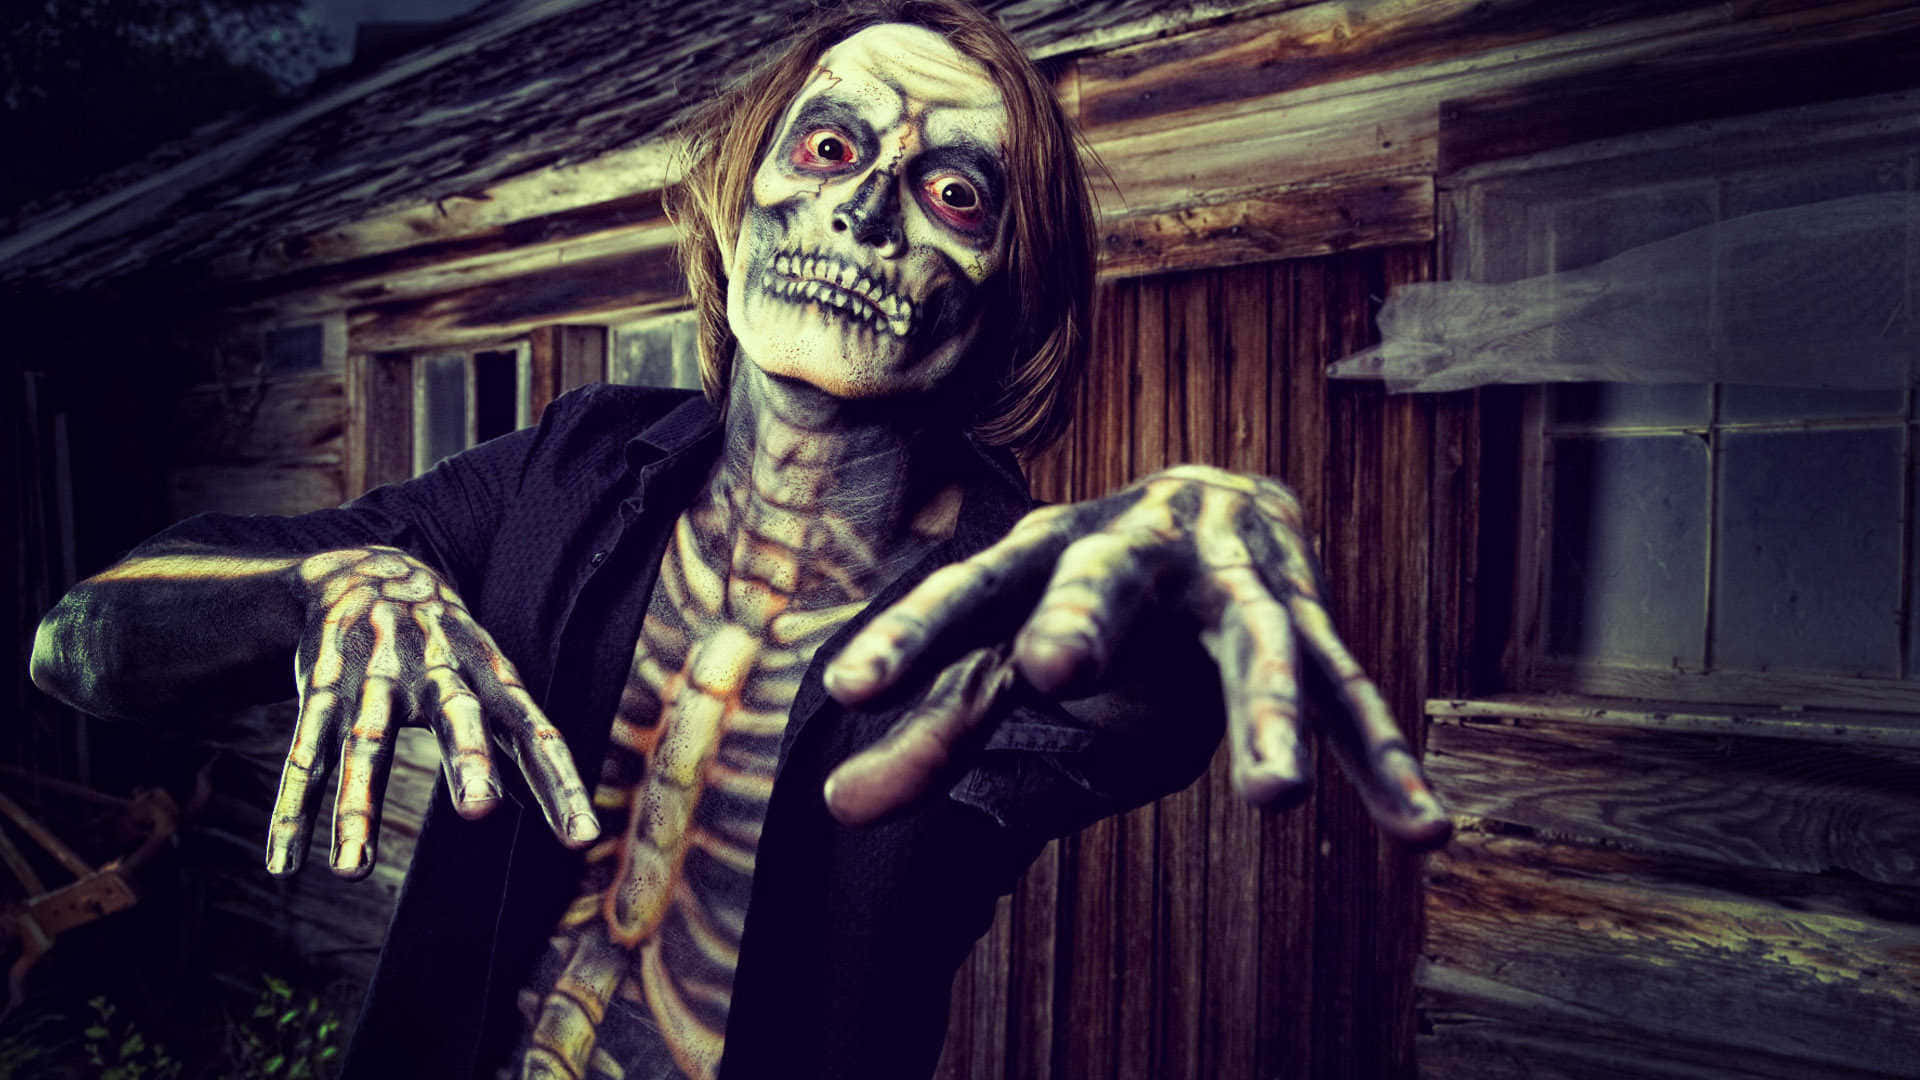 Get ready to scare this Halloween with these terrifyingly fun horror costumes! Wallpaper